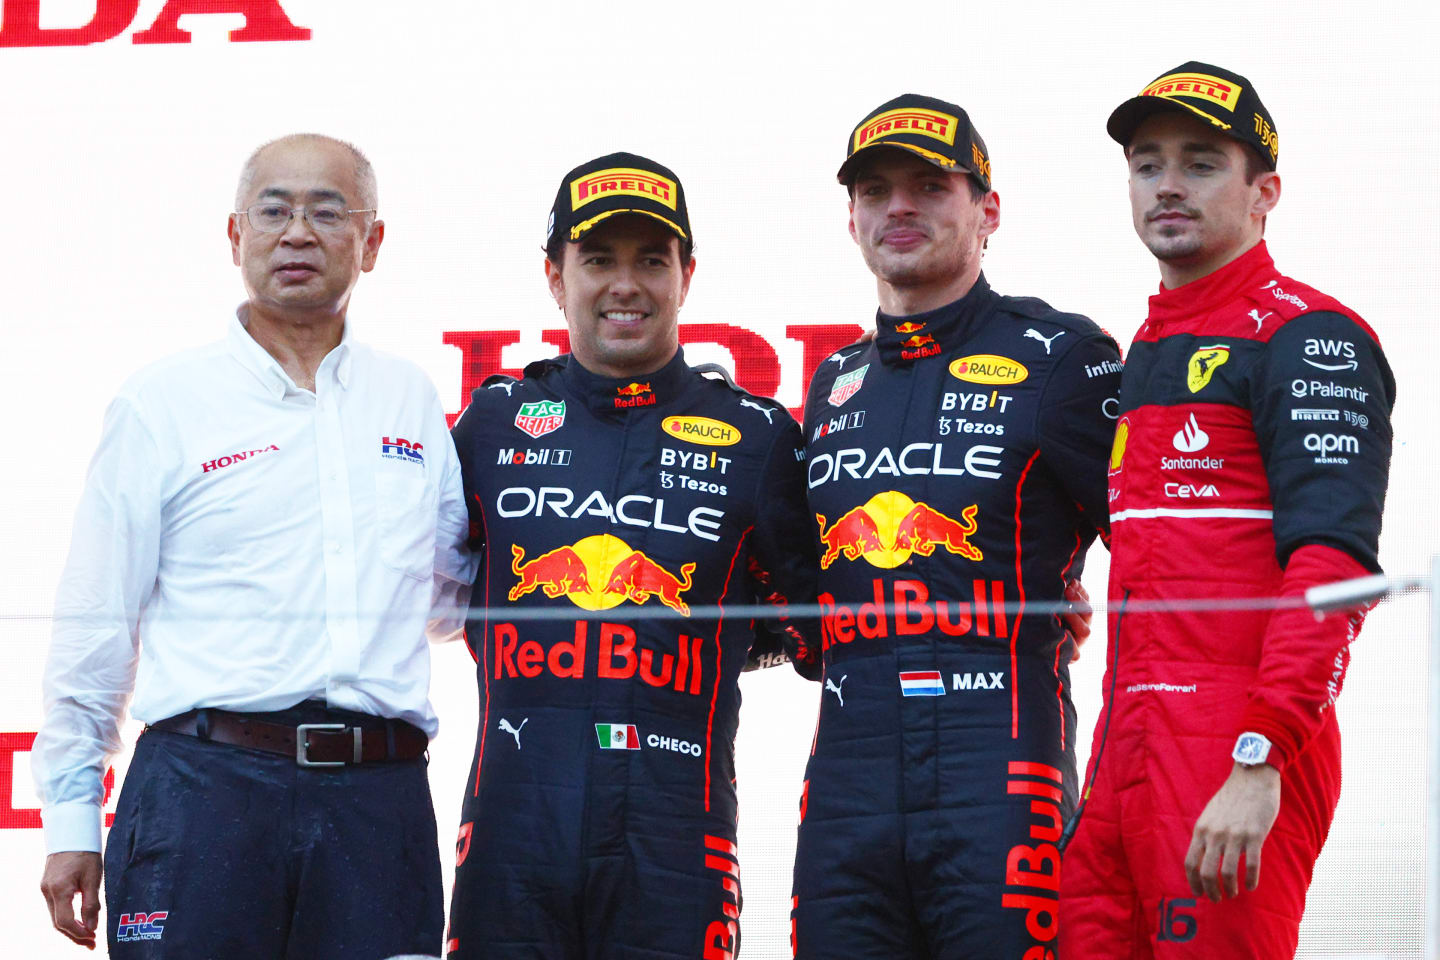 SUZUKA, JAPAN - OCTOBER 09: Race winner and 2022 F1 World Drivers Champion Max Verstappen of Netherlands and Oracle Red Bull Racing (second from right), Second placed Sergio Perez of Mexico and Oracle Red Bull Racing (second from left) and Third placed Charles Leclerc of Monaco and Ferrari celebrate on the podium during the F1 Grand Prix of Japan at Suzuka International Racing Course on October 09, 2022 in Suzuka, Japan. (Photo by Clive Rose/Getty Images)